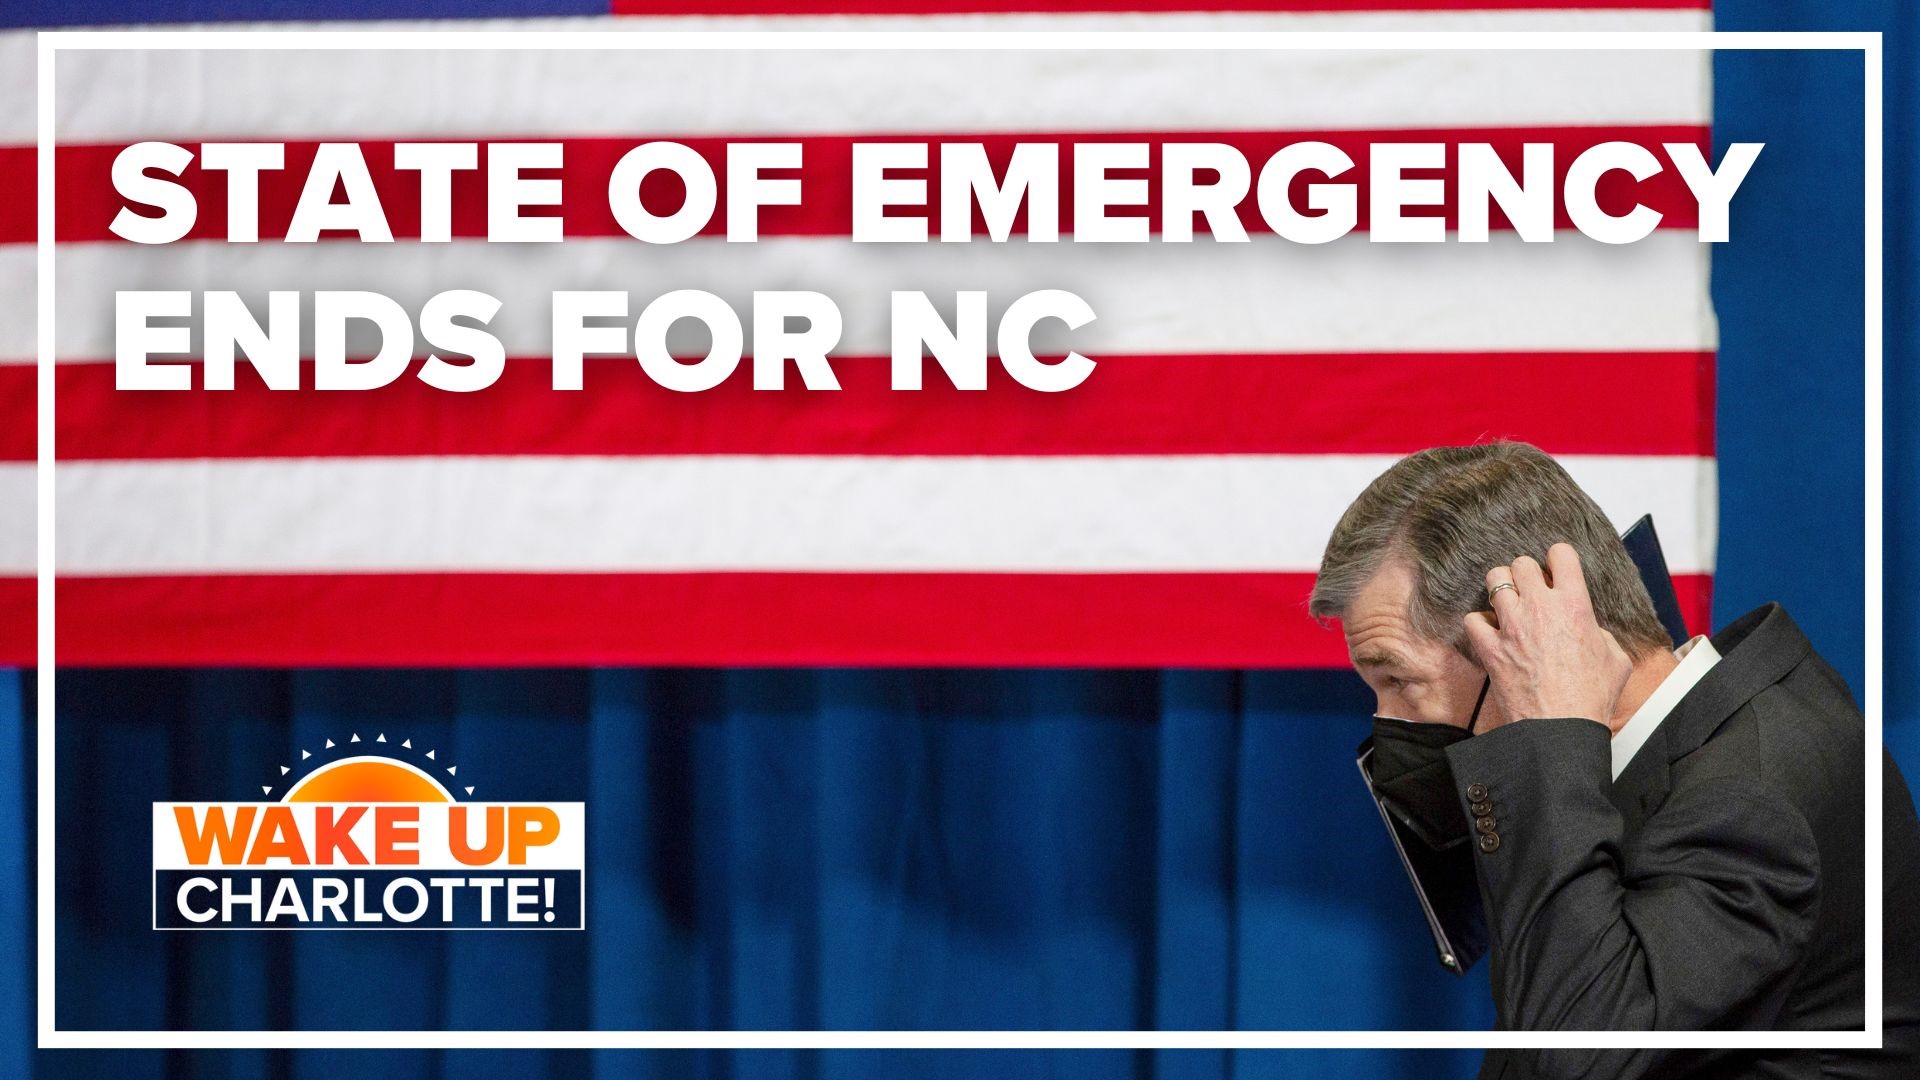 North Carolina's COVID-19 state of emergency ends Monday. And while you might notice, it's something that's helped the state get through the pandemic.